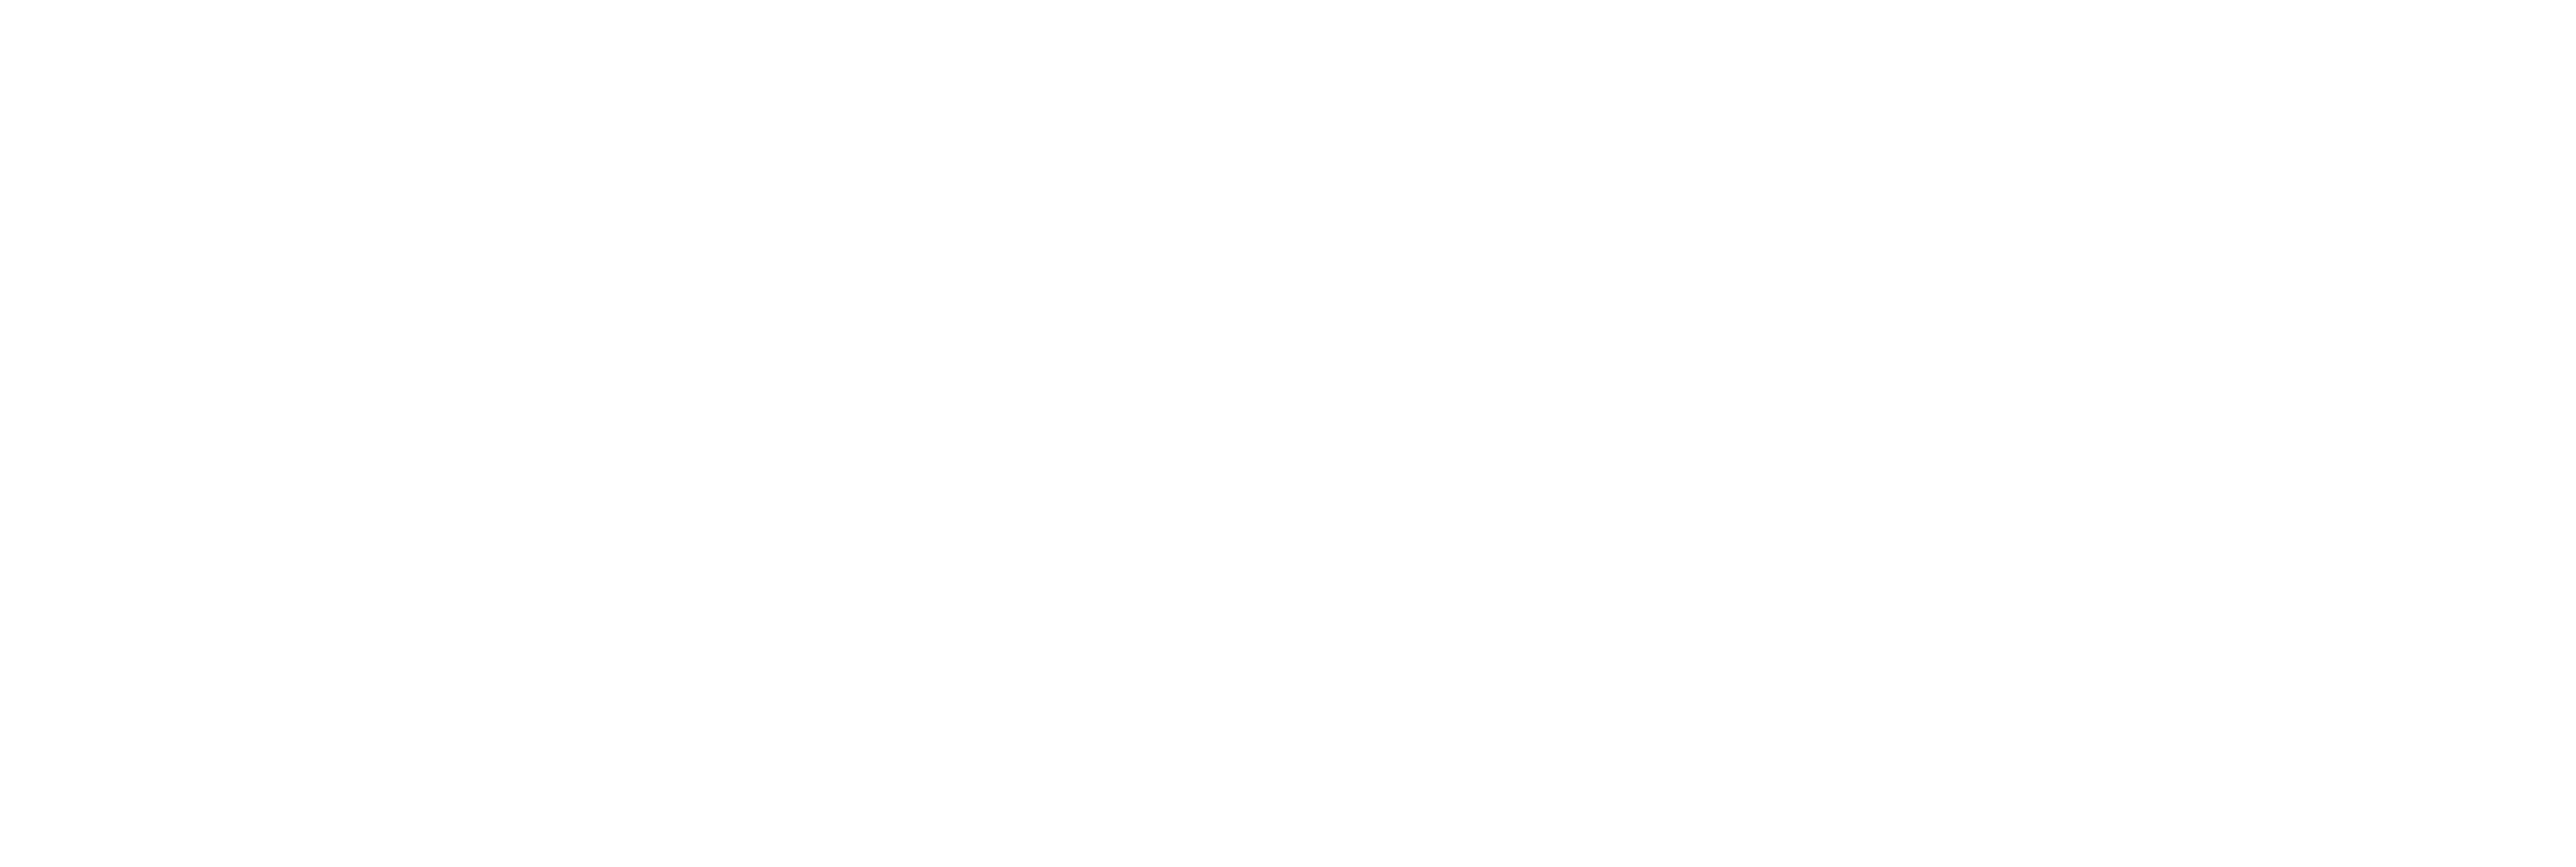 Royal College of Physicians logo